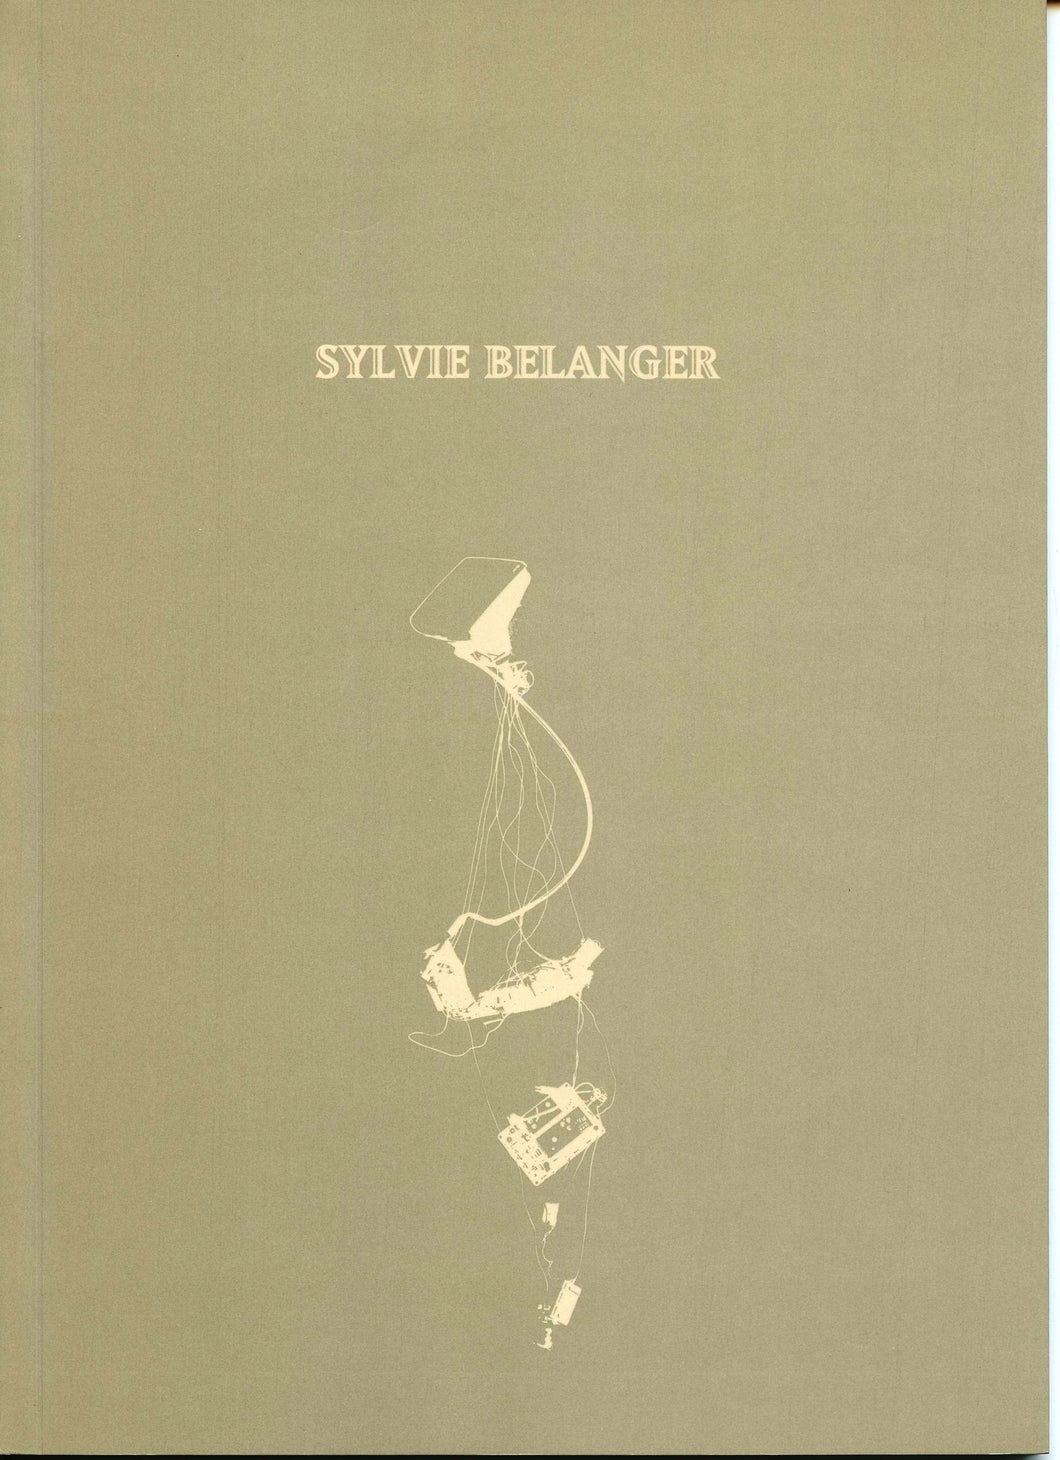 Place Setting: The Site of Seeing in Citer Le Lieu: Sylvie Belanger